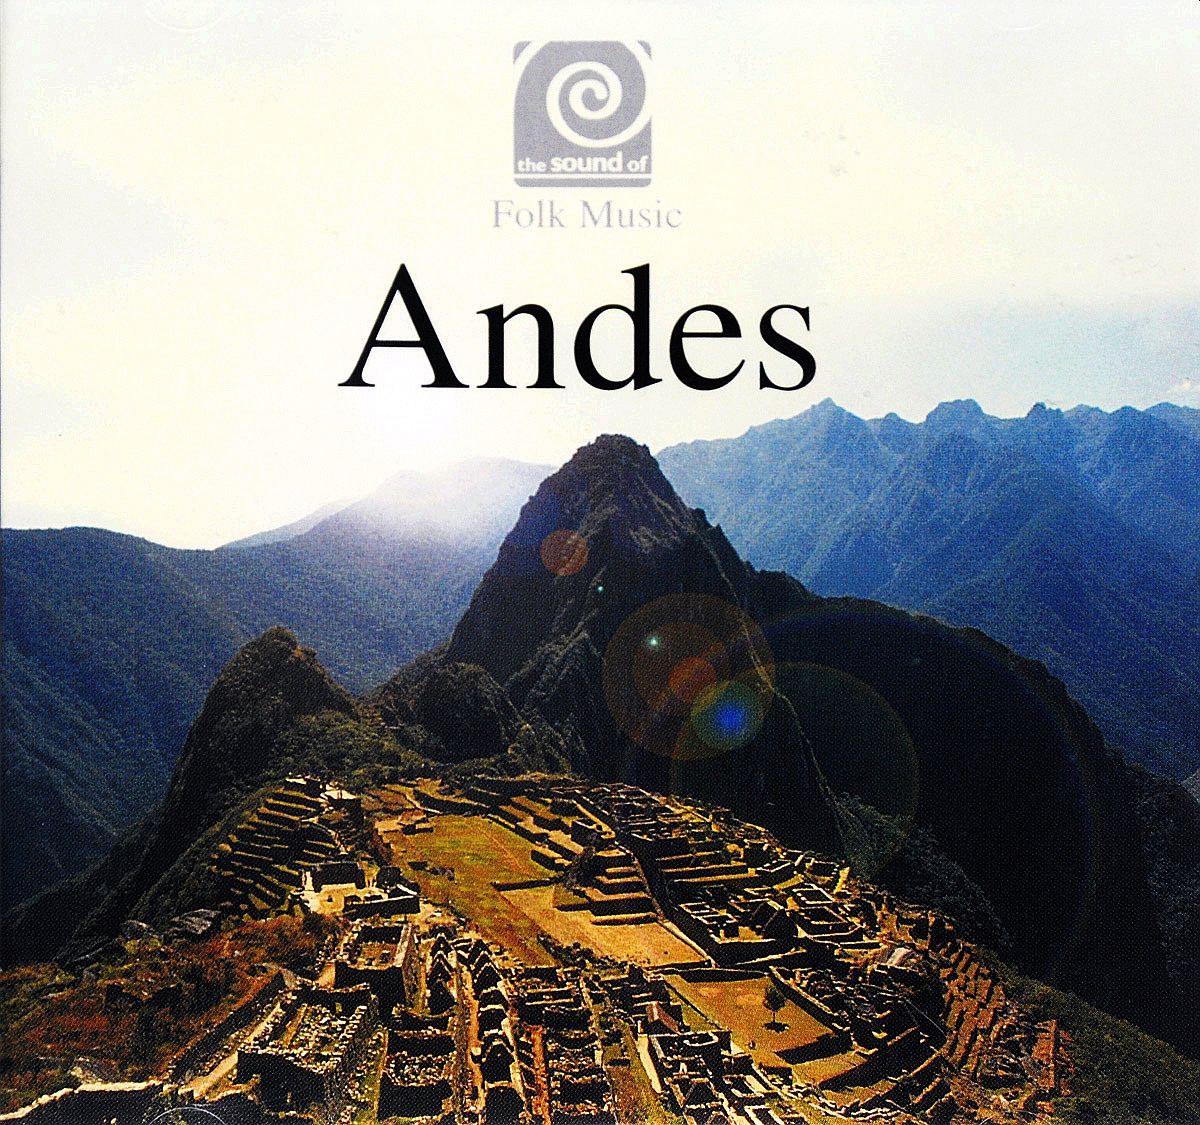 Sound Of Folk Music. Andes